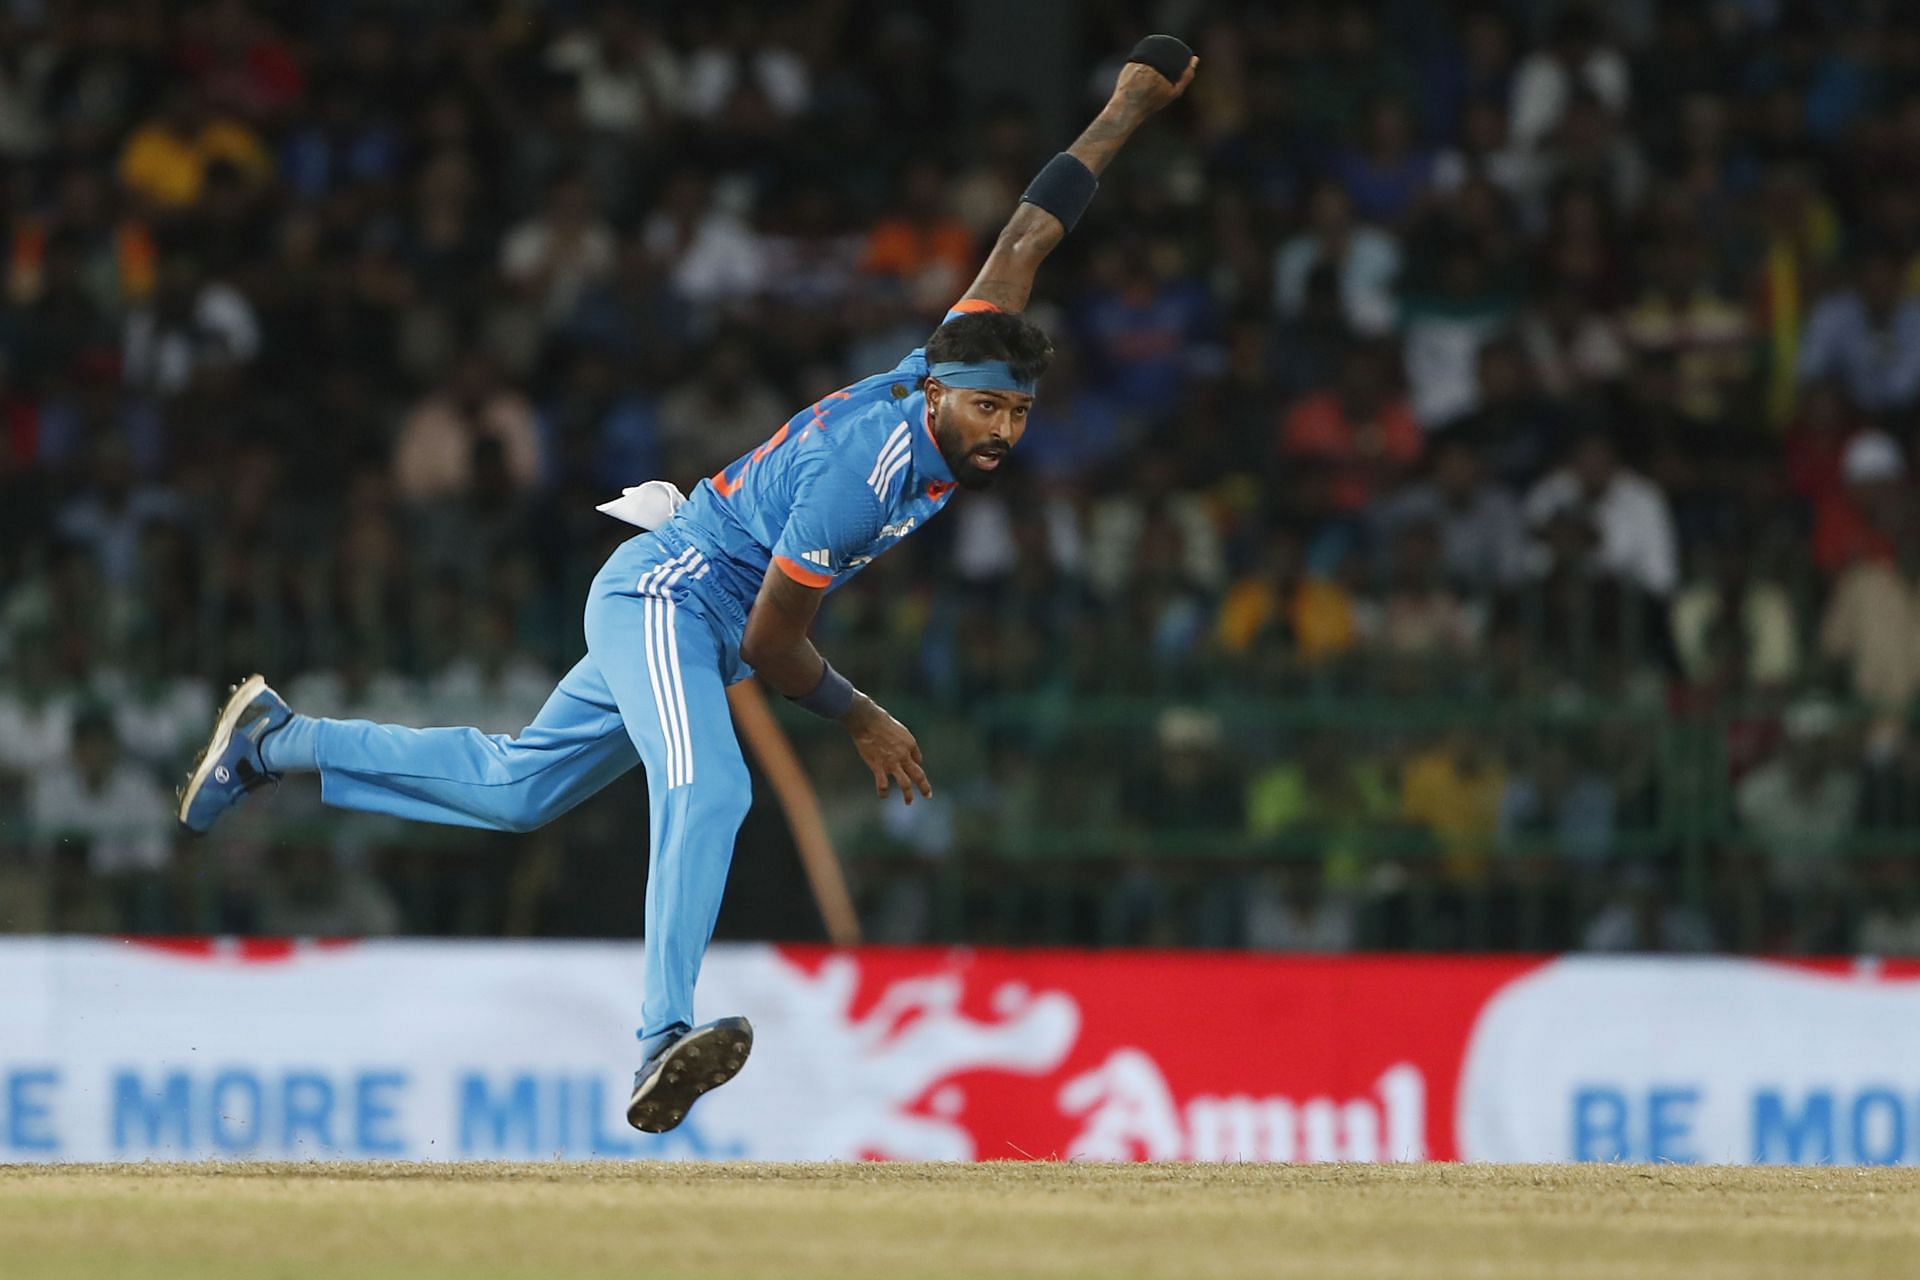 Hardik Pandya has not yet recovered from the injury he suffered during the World Cup.